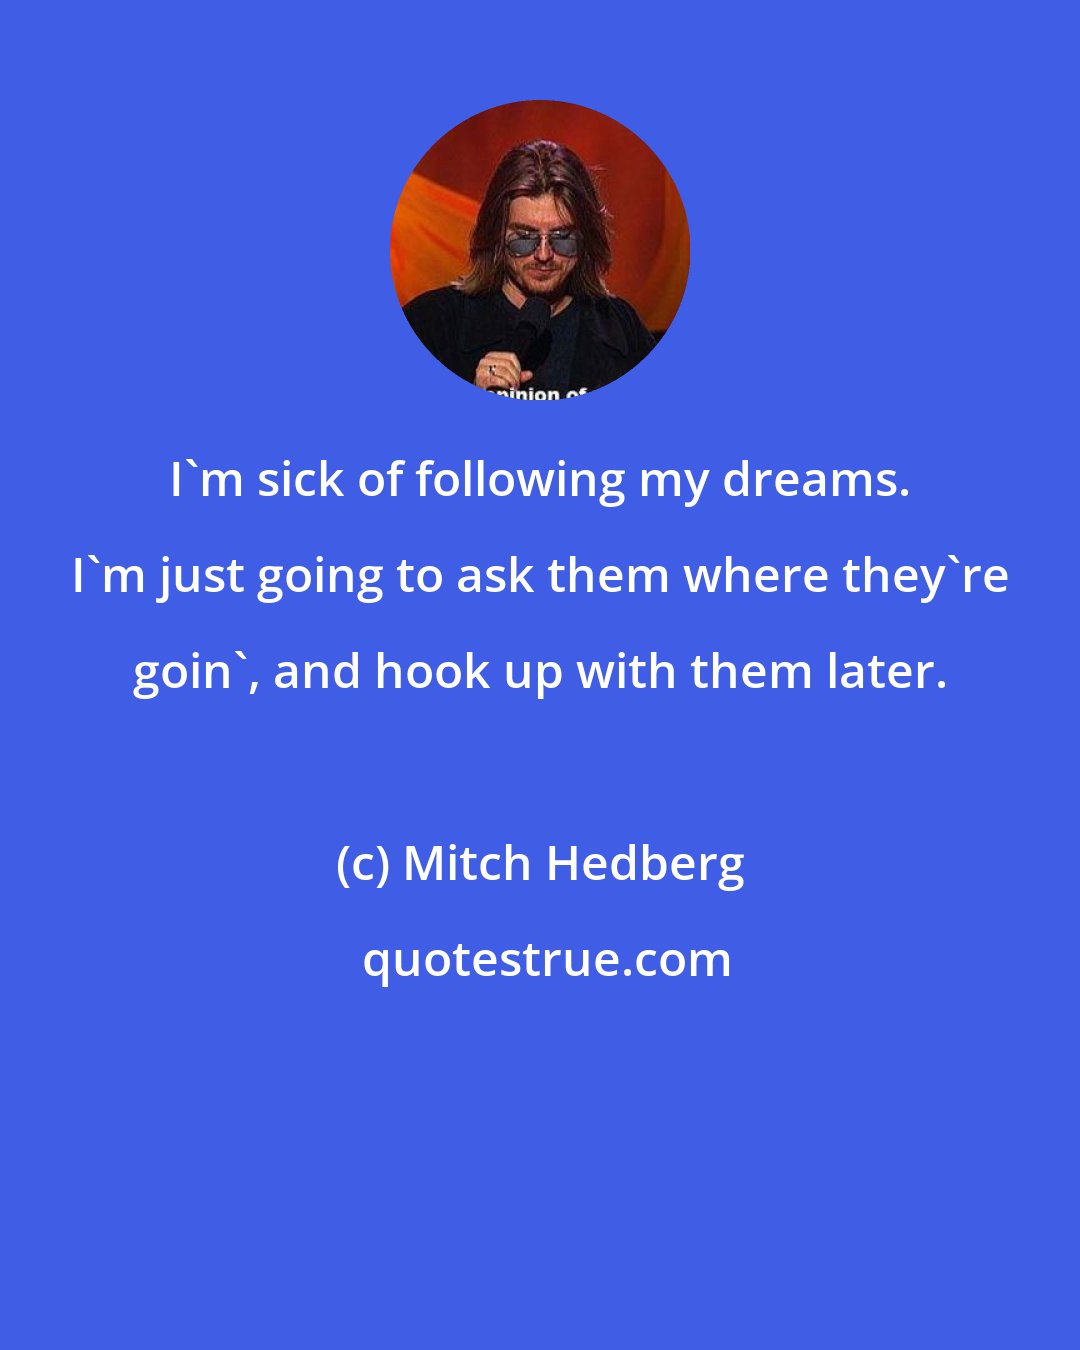 Mitch Hedberg: I'm sick of following my dreams. I'm just going to ask them where they're goin', and hook up with them later.